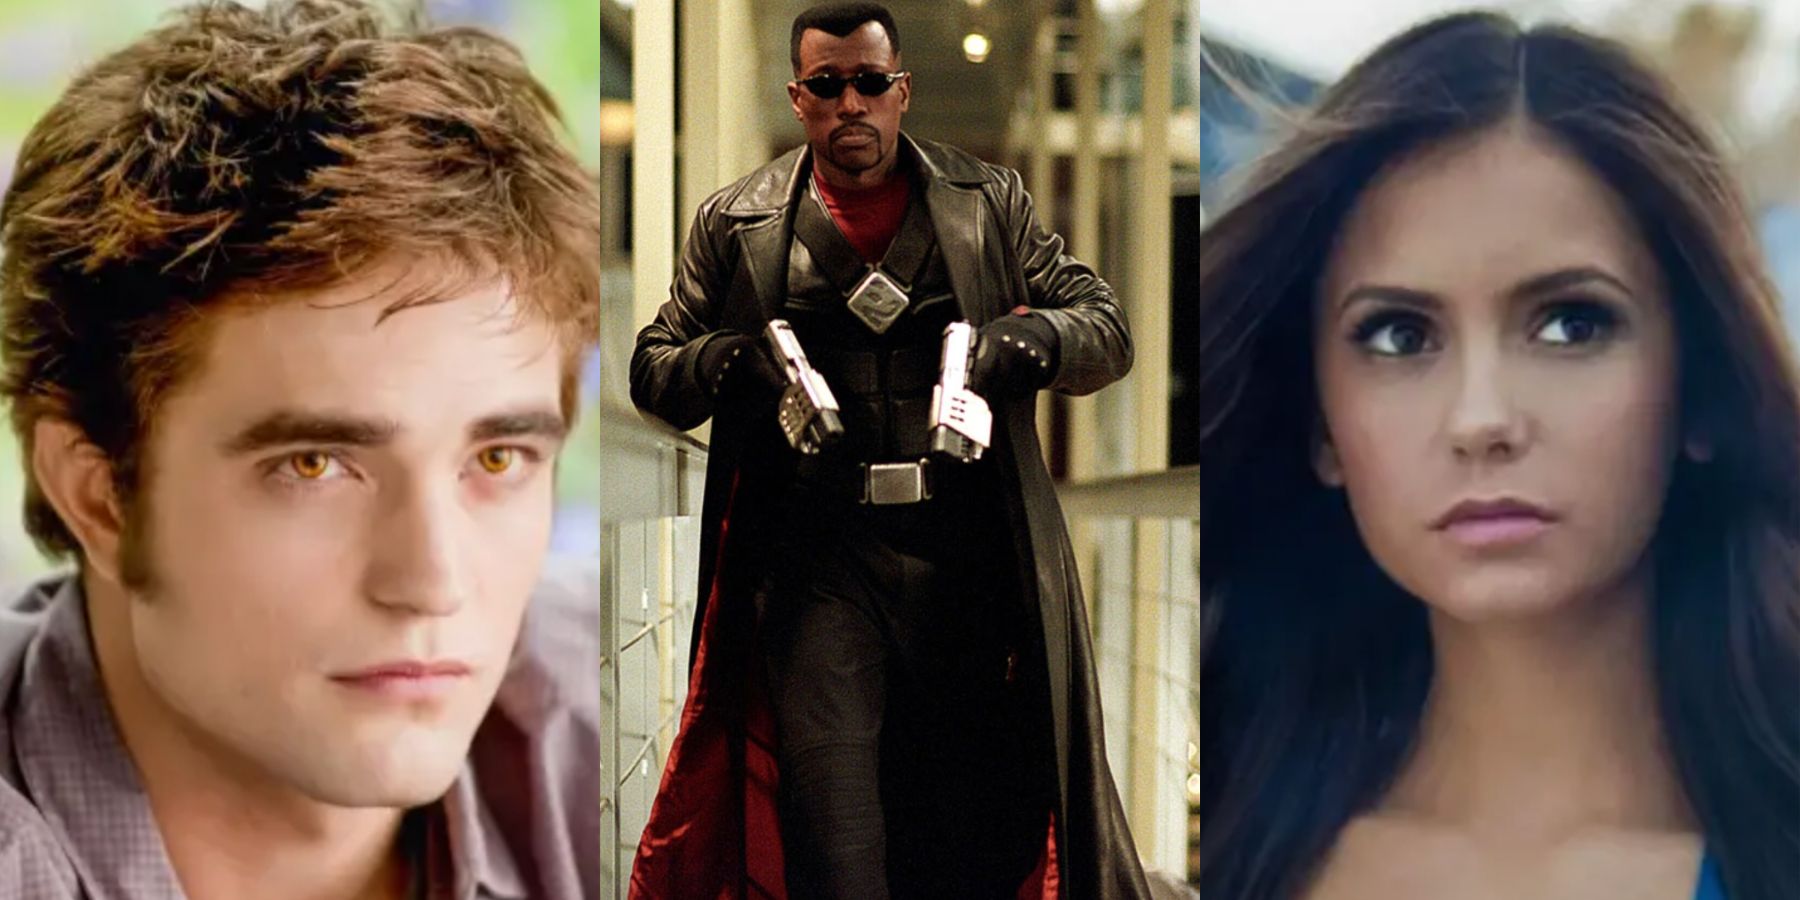 A split image features Twilight's Edward, Blade's Blade, and The Vampire Diaries' Elena